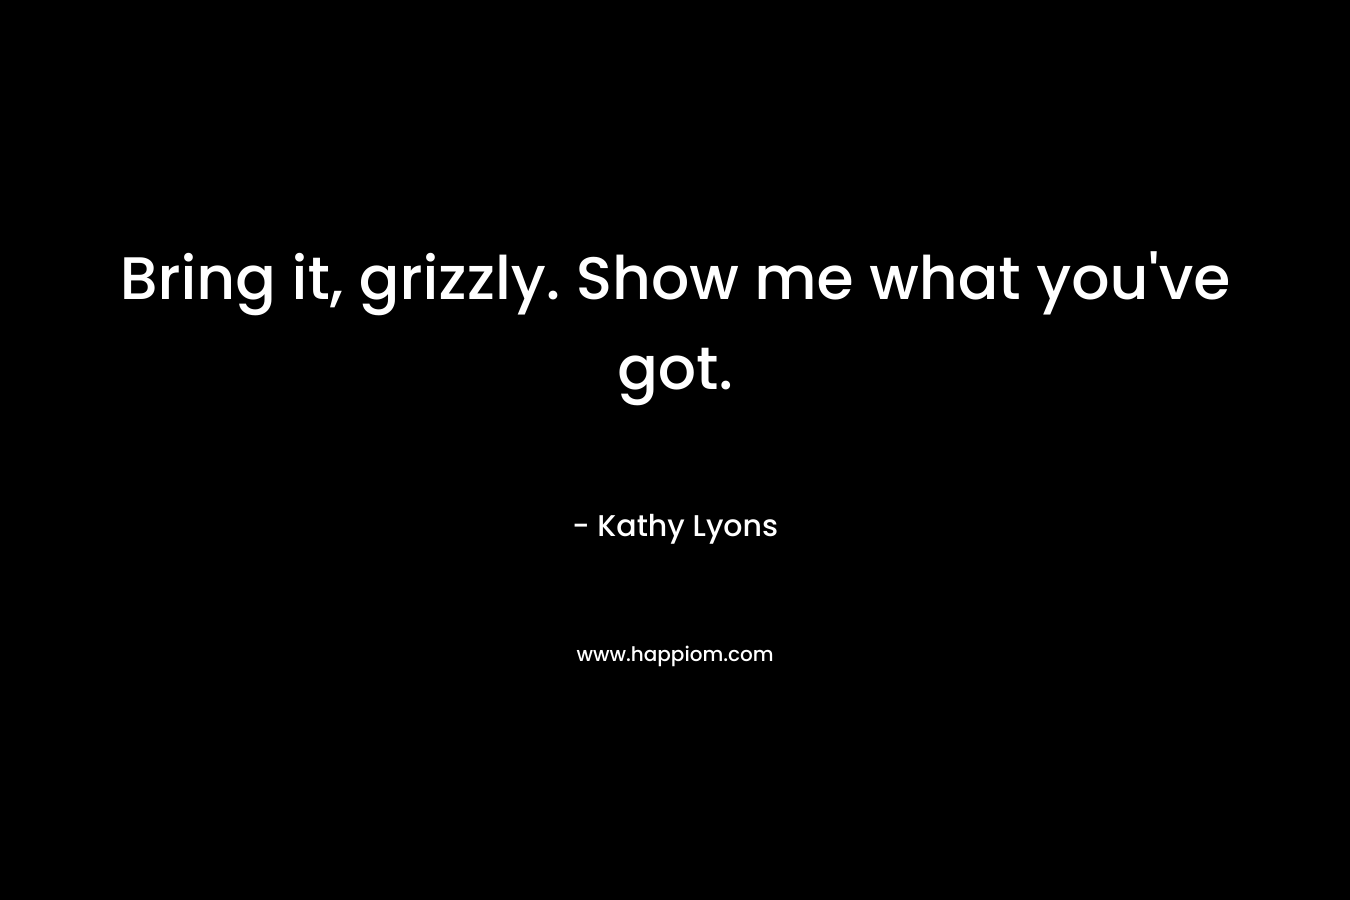 Bring it, grizzly. Show me what you’ve got. – Kathy Lyons